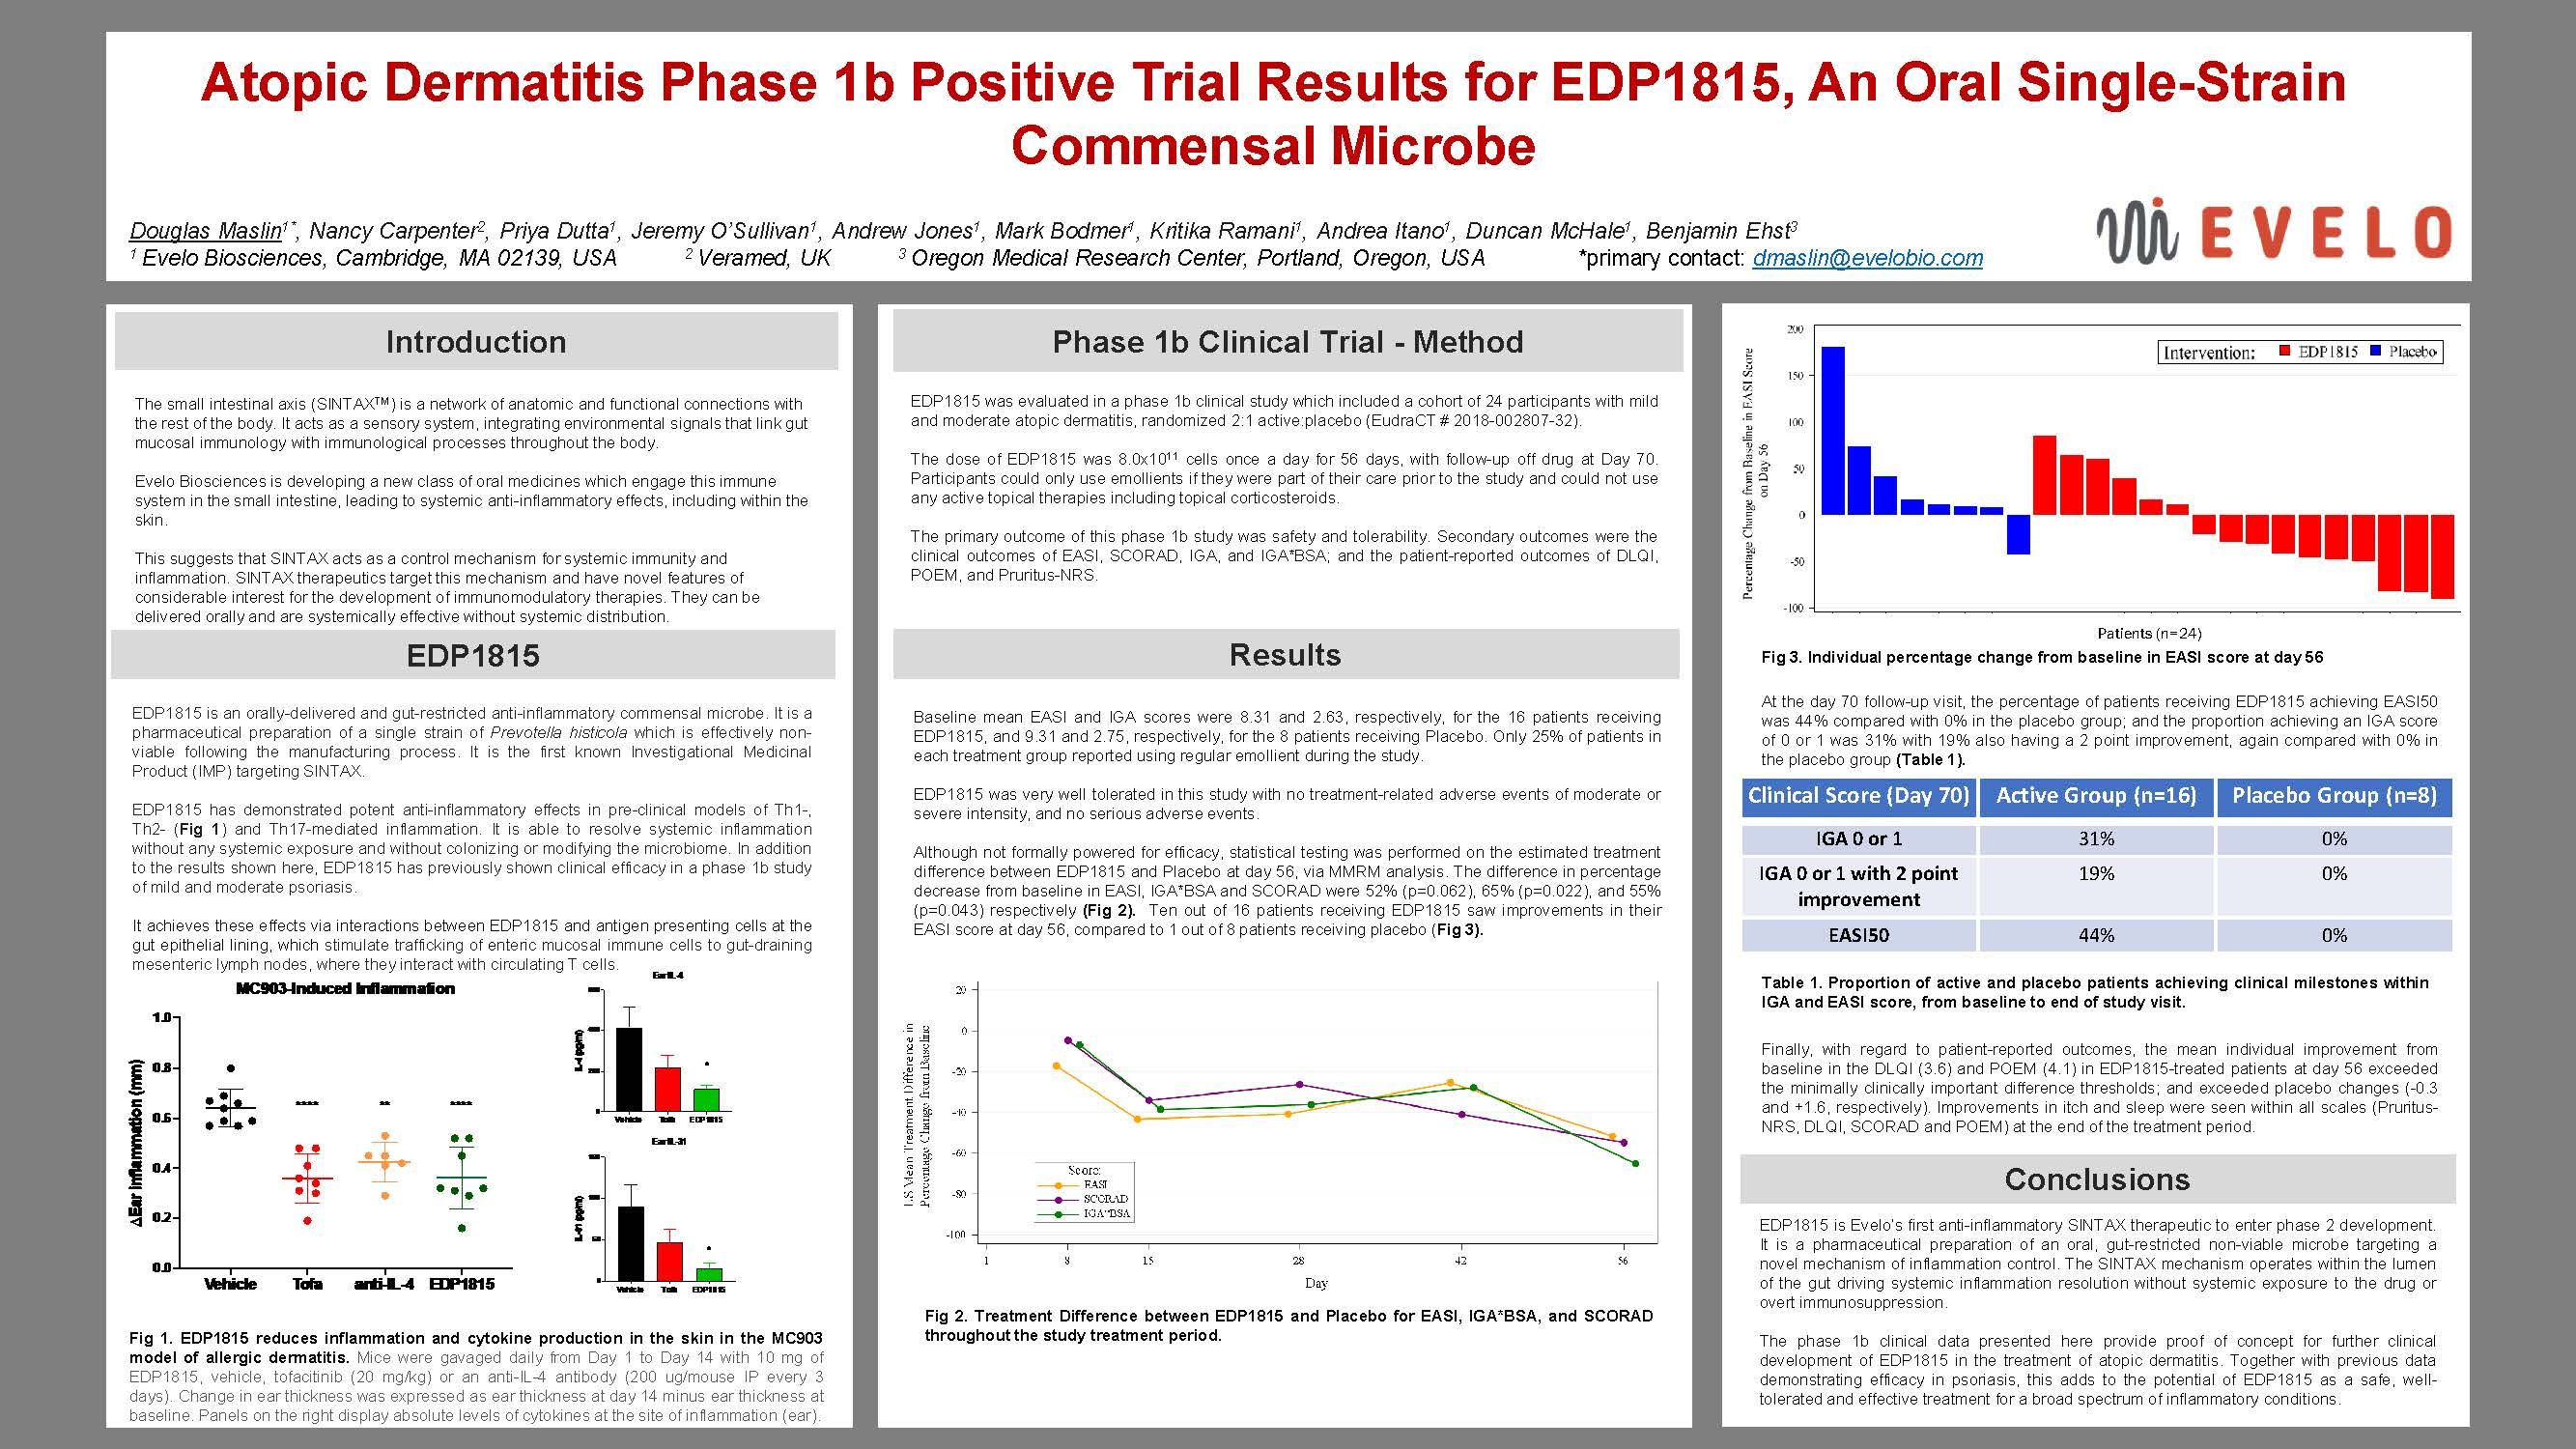 Atopic Dermatitis Phase 1b Positive Trial Results for EDP1815, An Oral Single-Strain Commensal Microbe